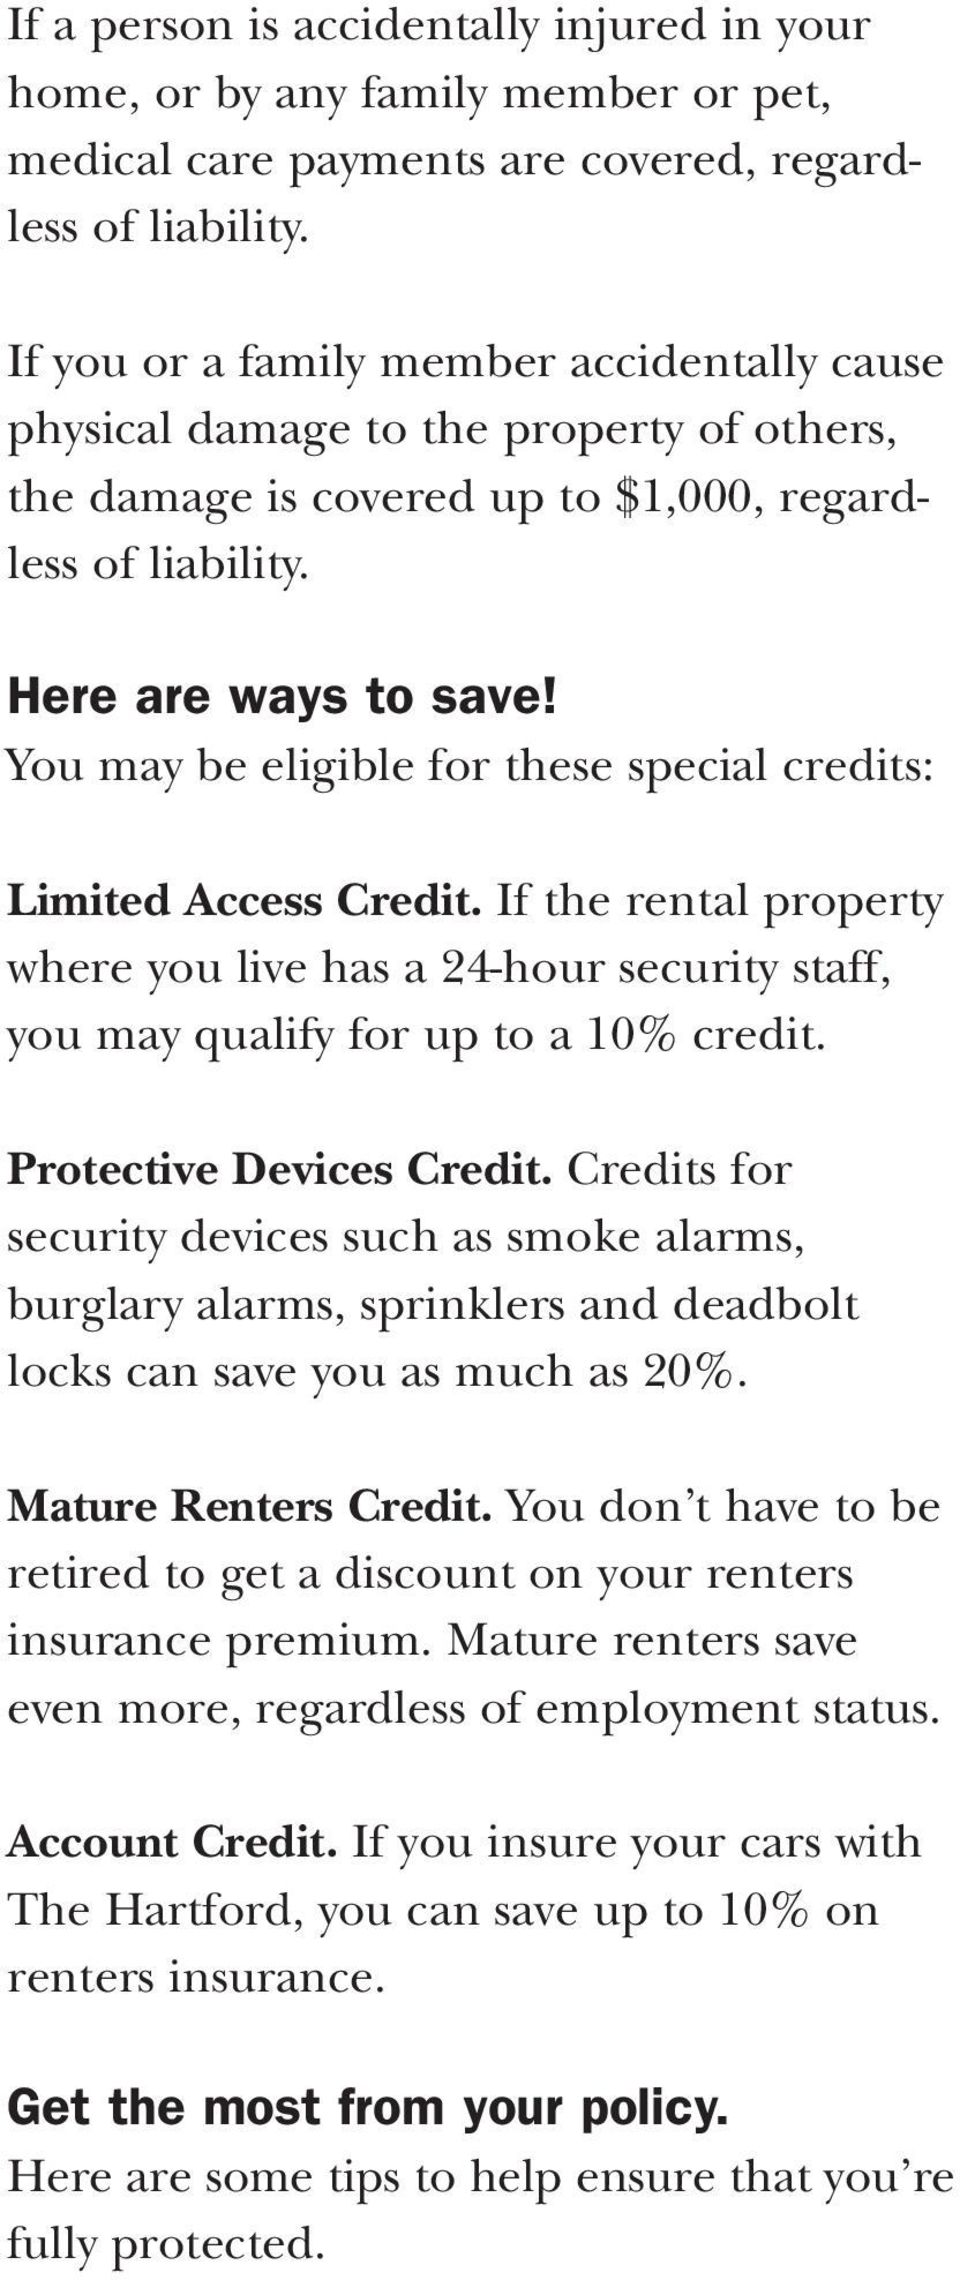 You may be eligible for these special credits: Limited Access Credit. If the rental property where you live has a 24-hour security staff, you may qualify for up to a 10% credit.